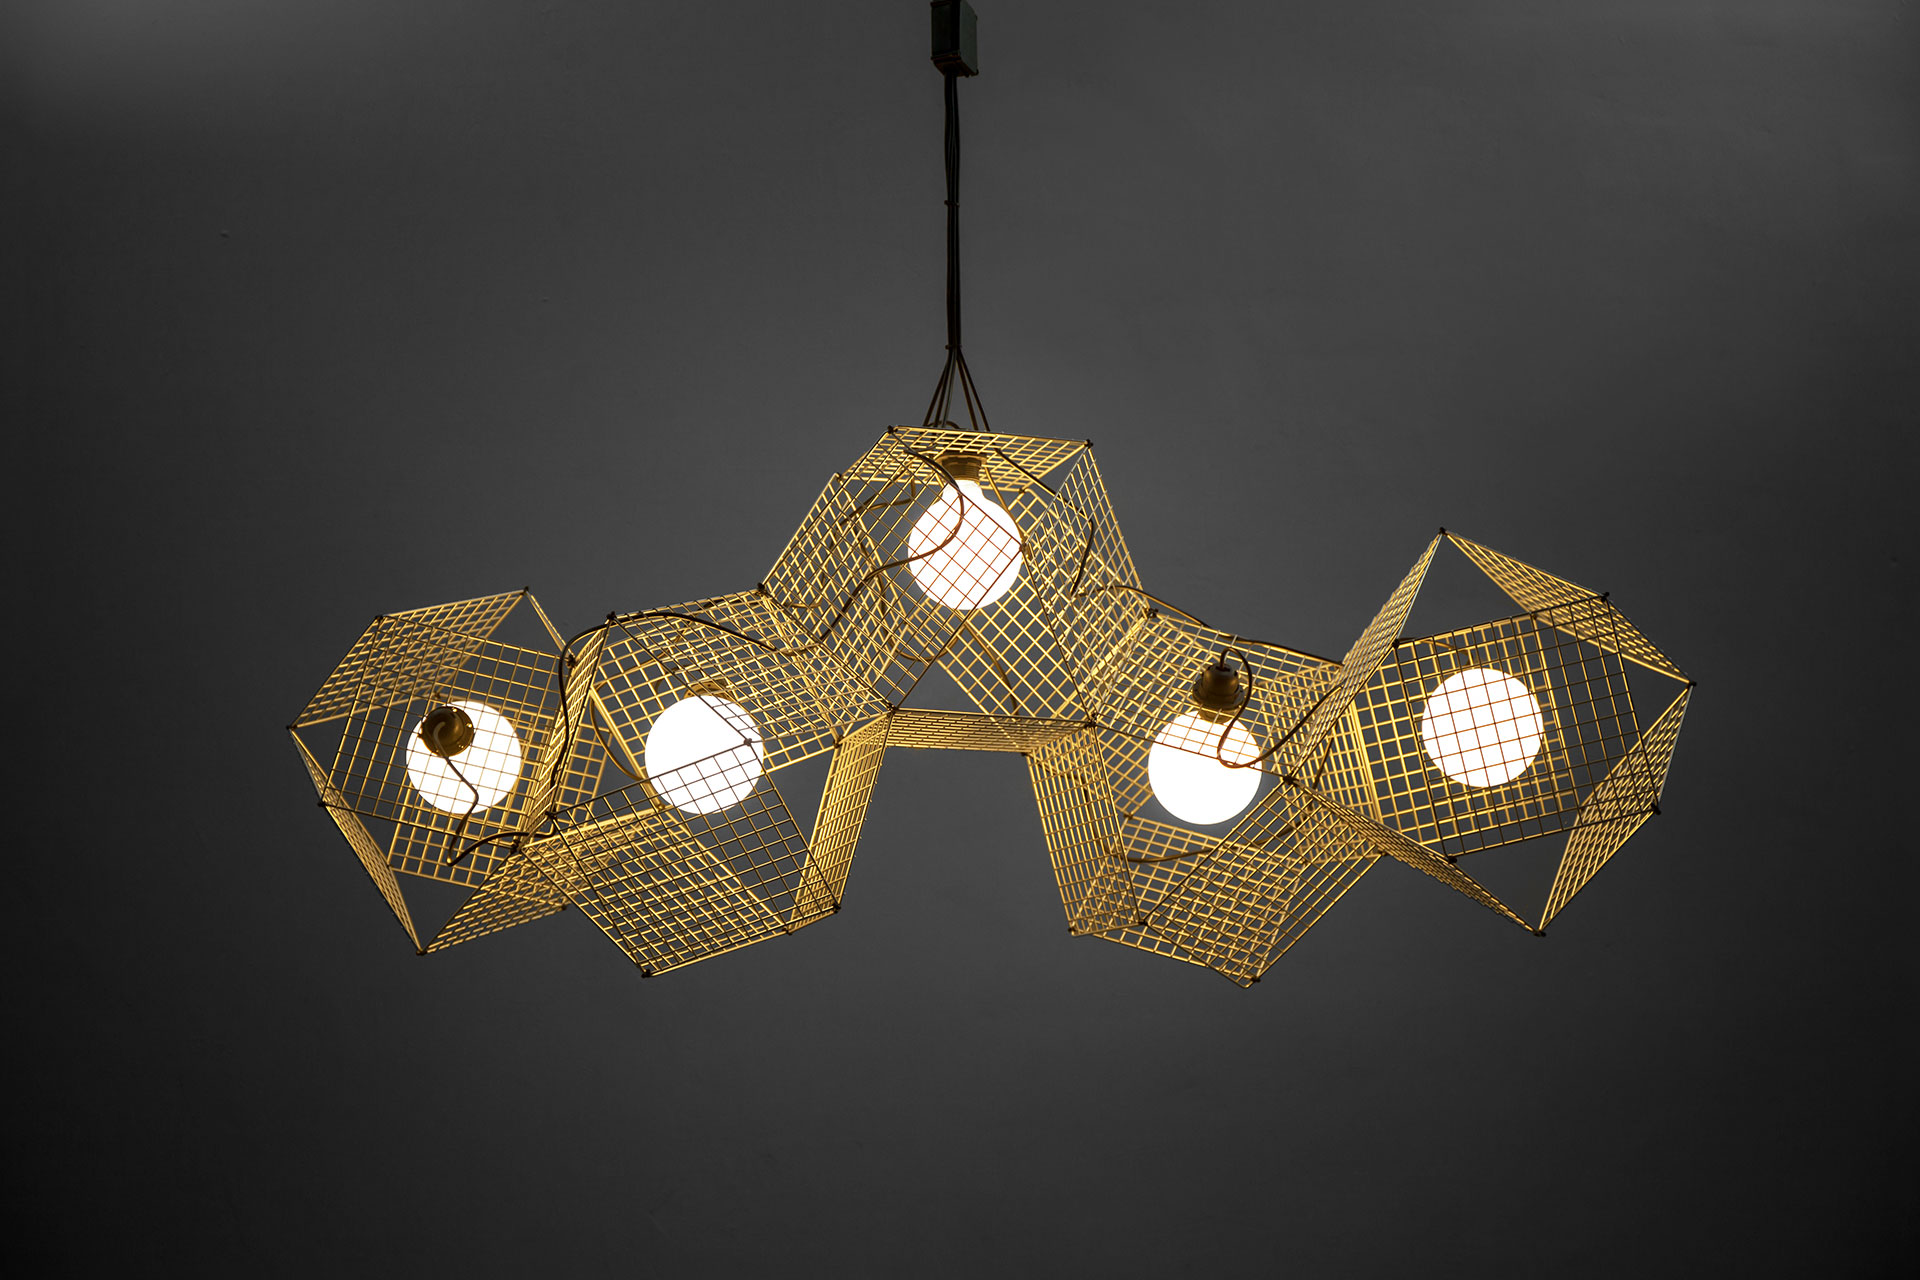 Unique brass ceiling lamp in trendy gold color inspired by modern geometric design